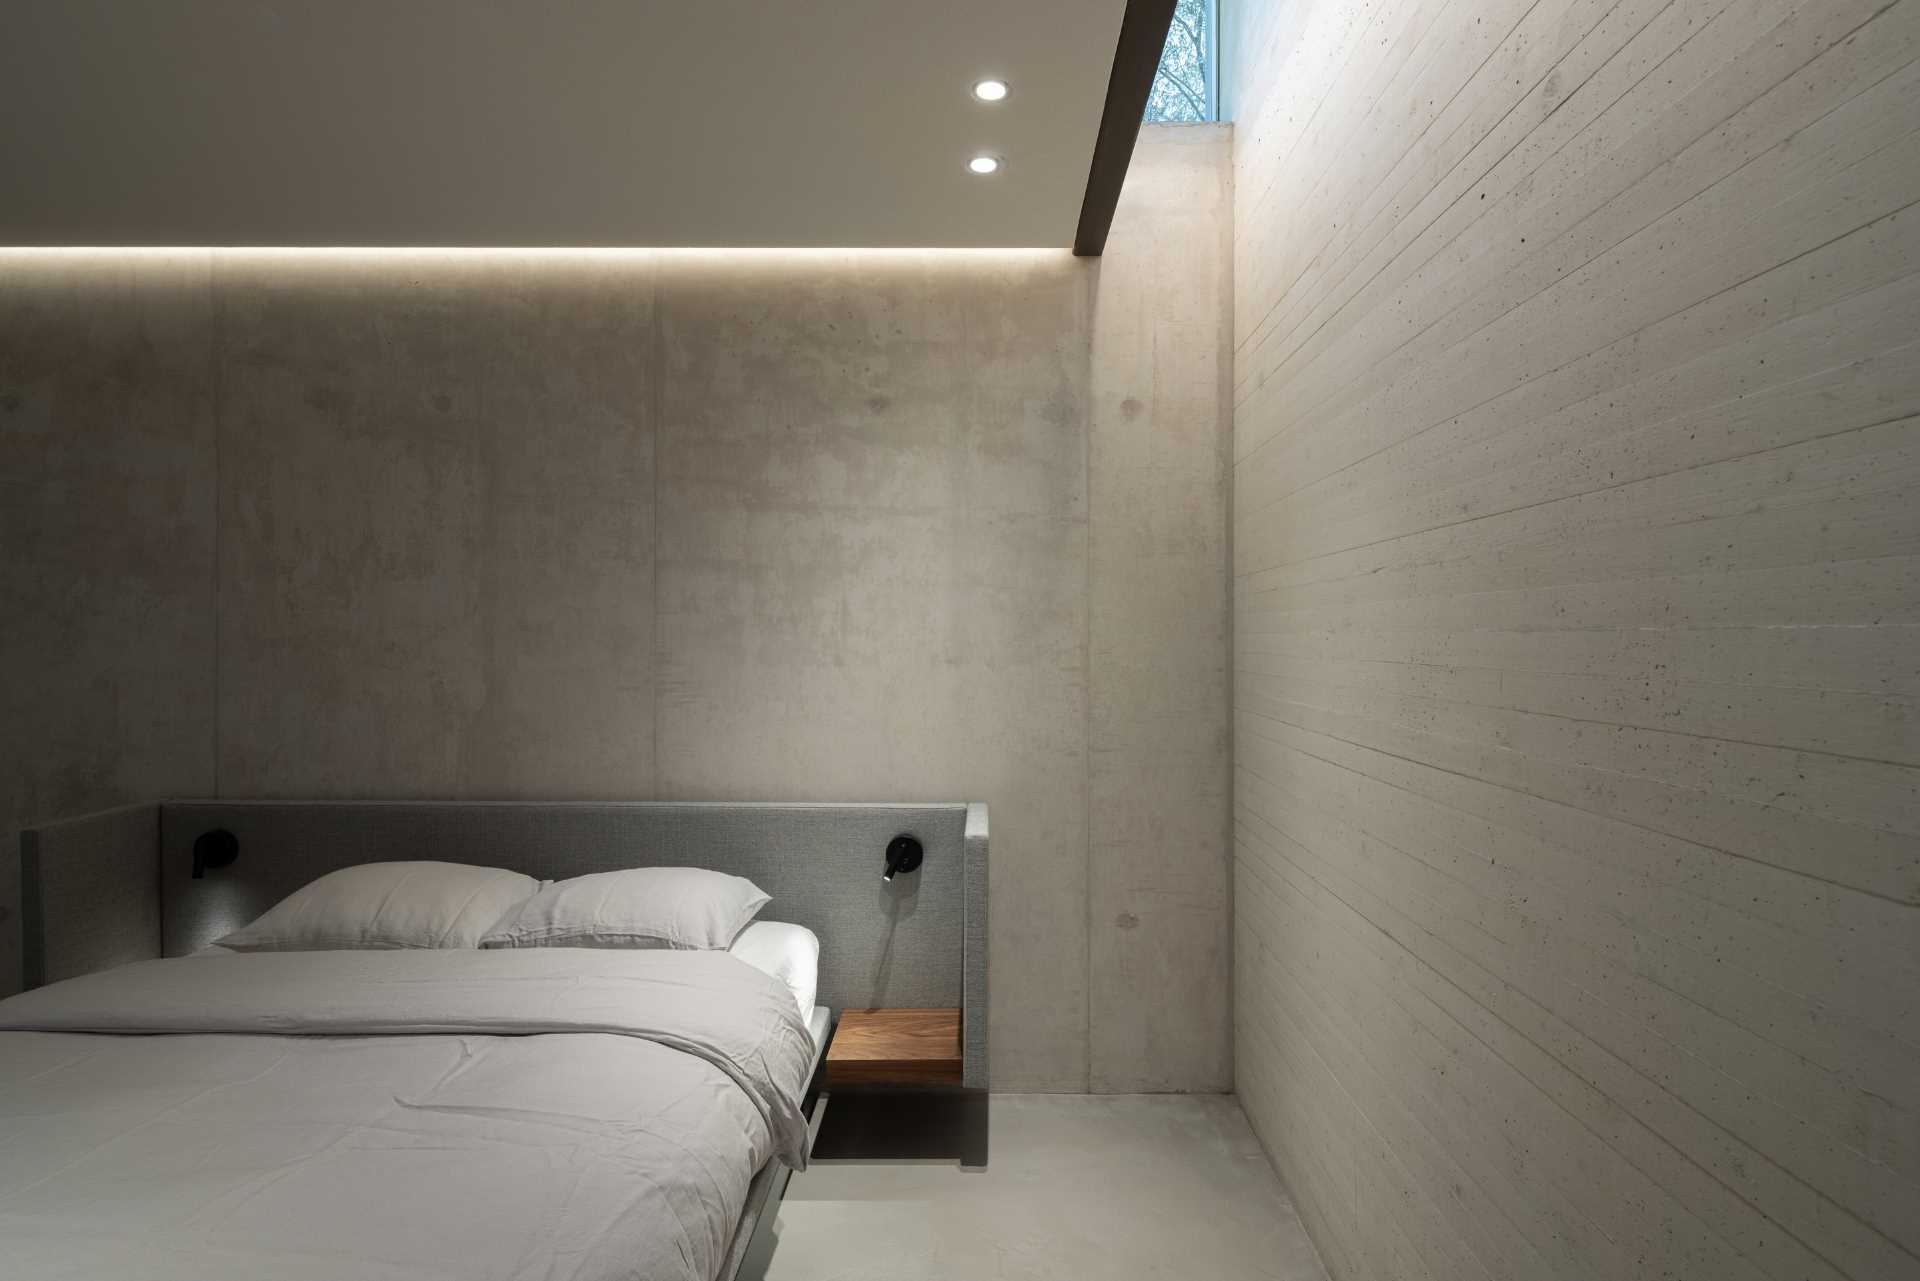 In addition to the stairs, there's also a glass lift that connects all of the levels of the home, like the lowest level which houses a bedroom and bathroom.  It's six metres below the entry-level, making it feel like you are underground.